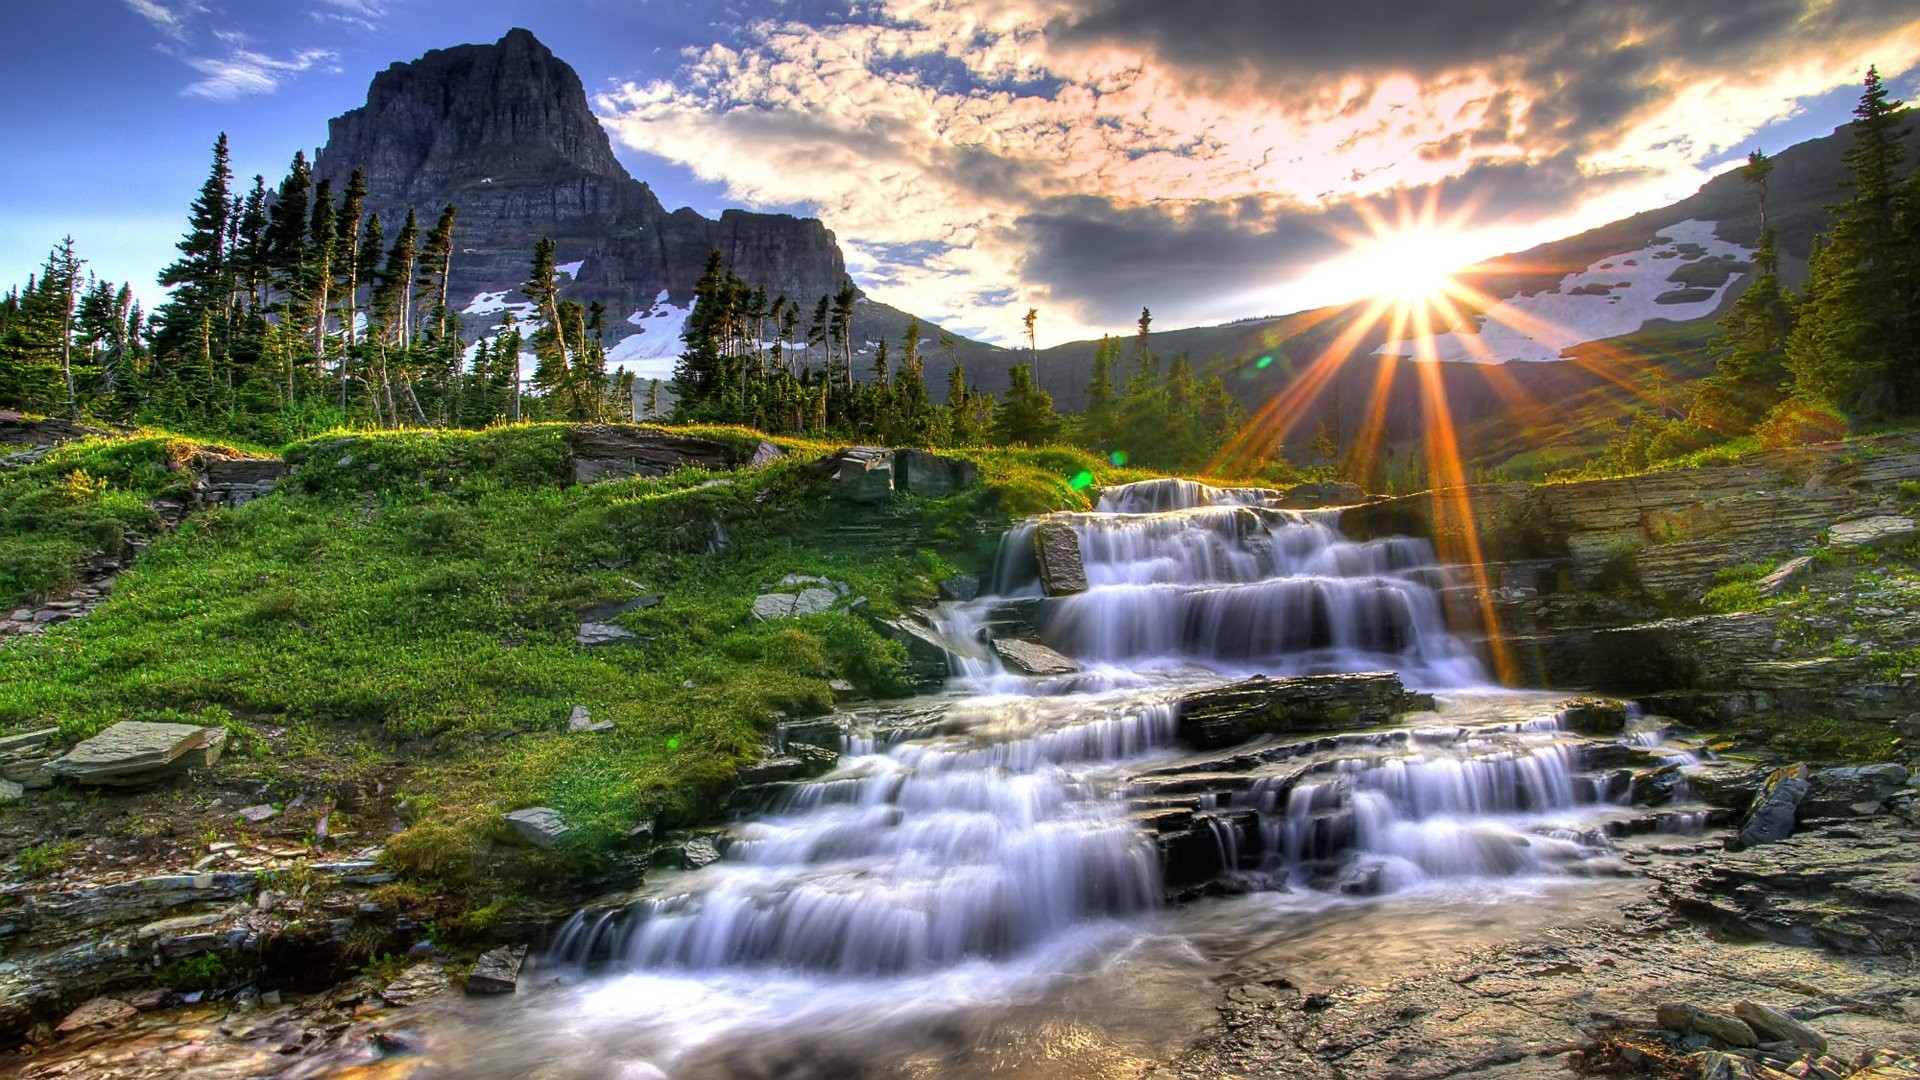 General 1920x1080 landscape water waterfall mountains sunlight sky nature HDR Sun clouds